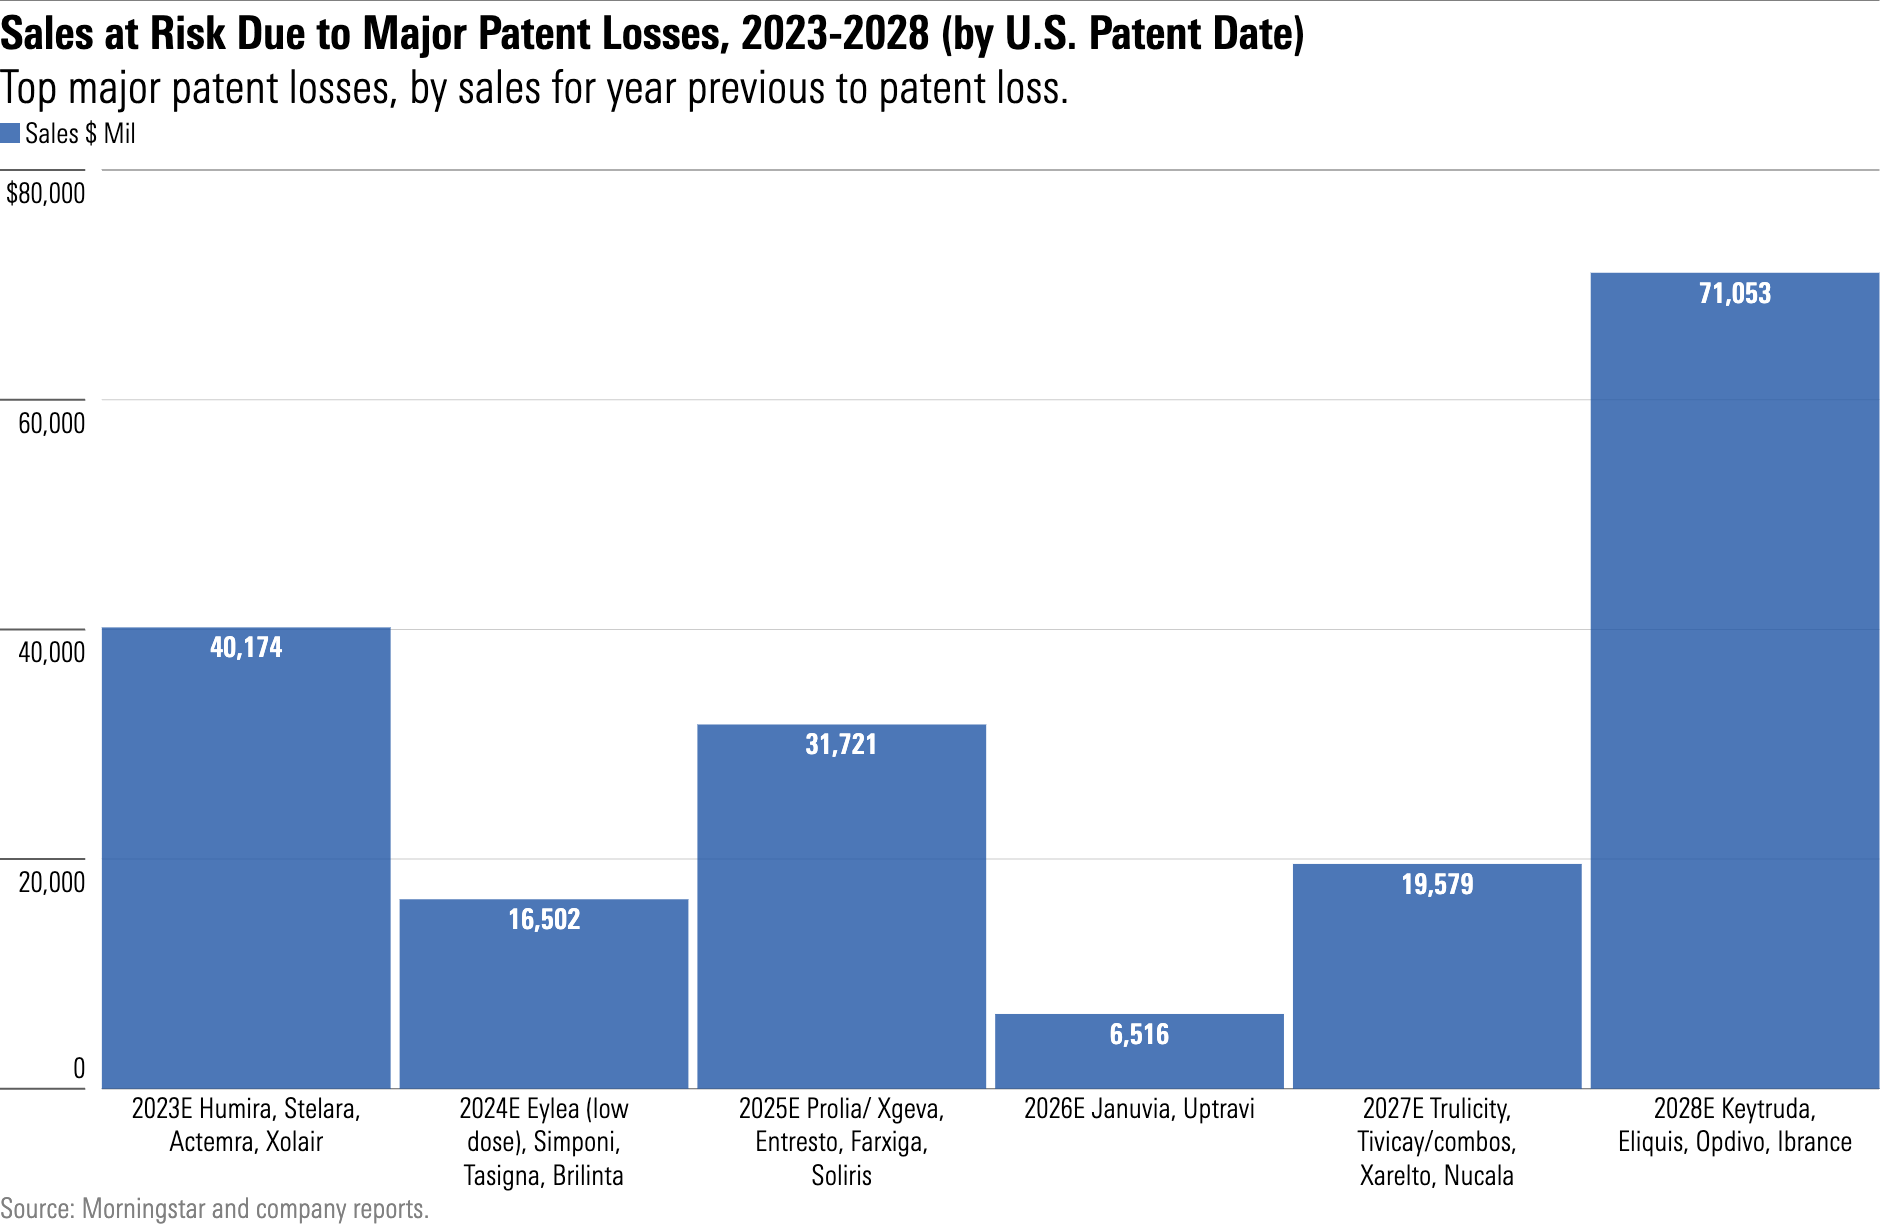 Bar chart showing expected major biopharma firms' sales losses due to expiring patents, between 2023 and 2028.